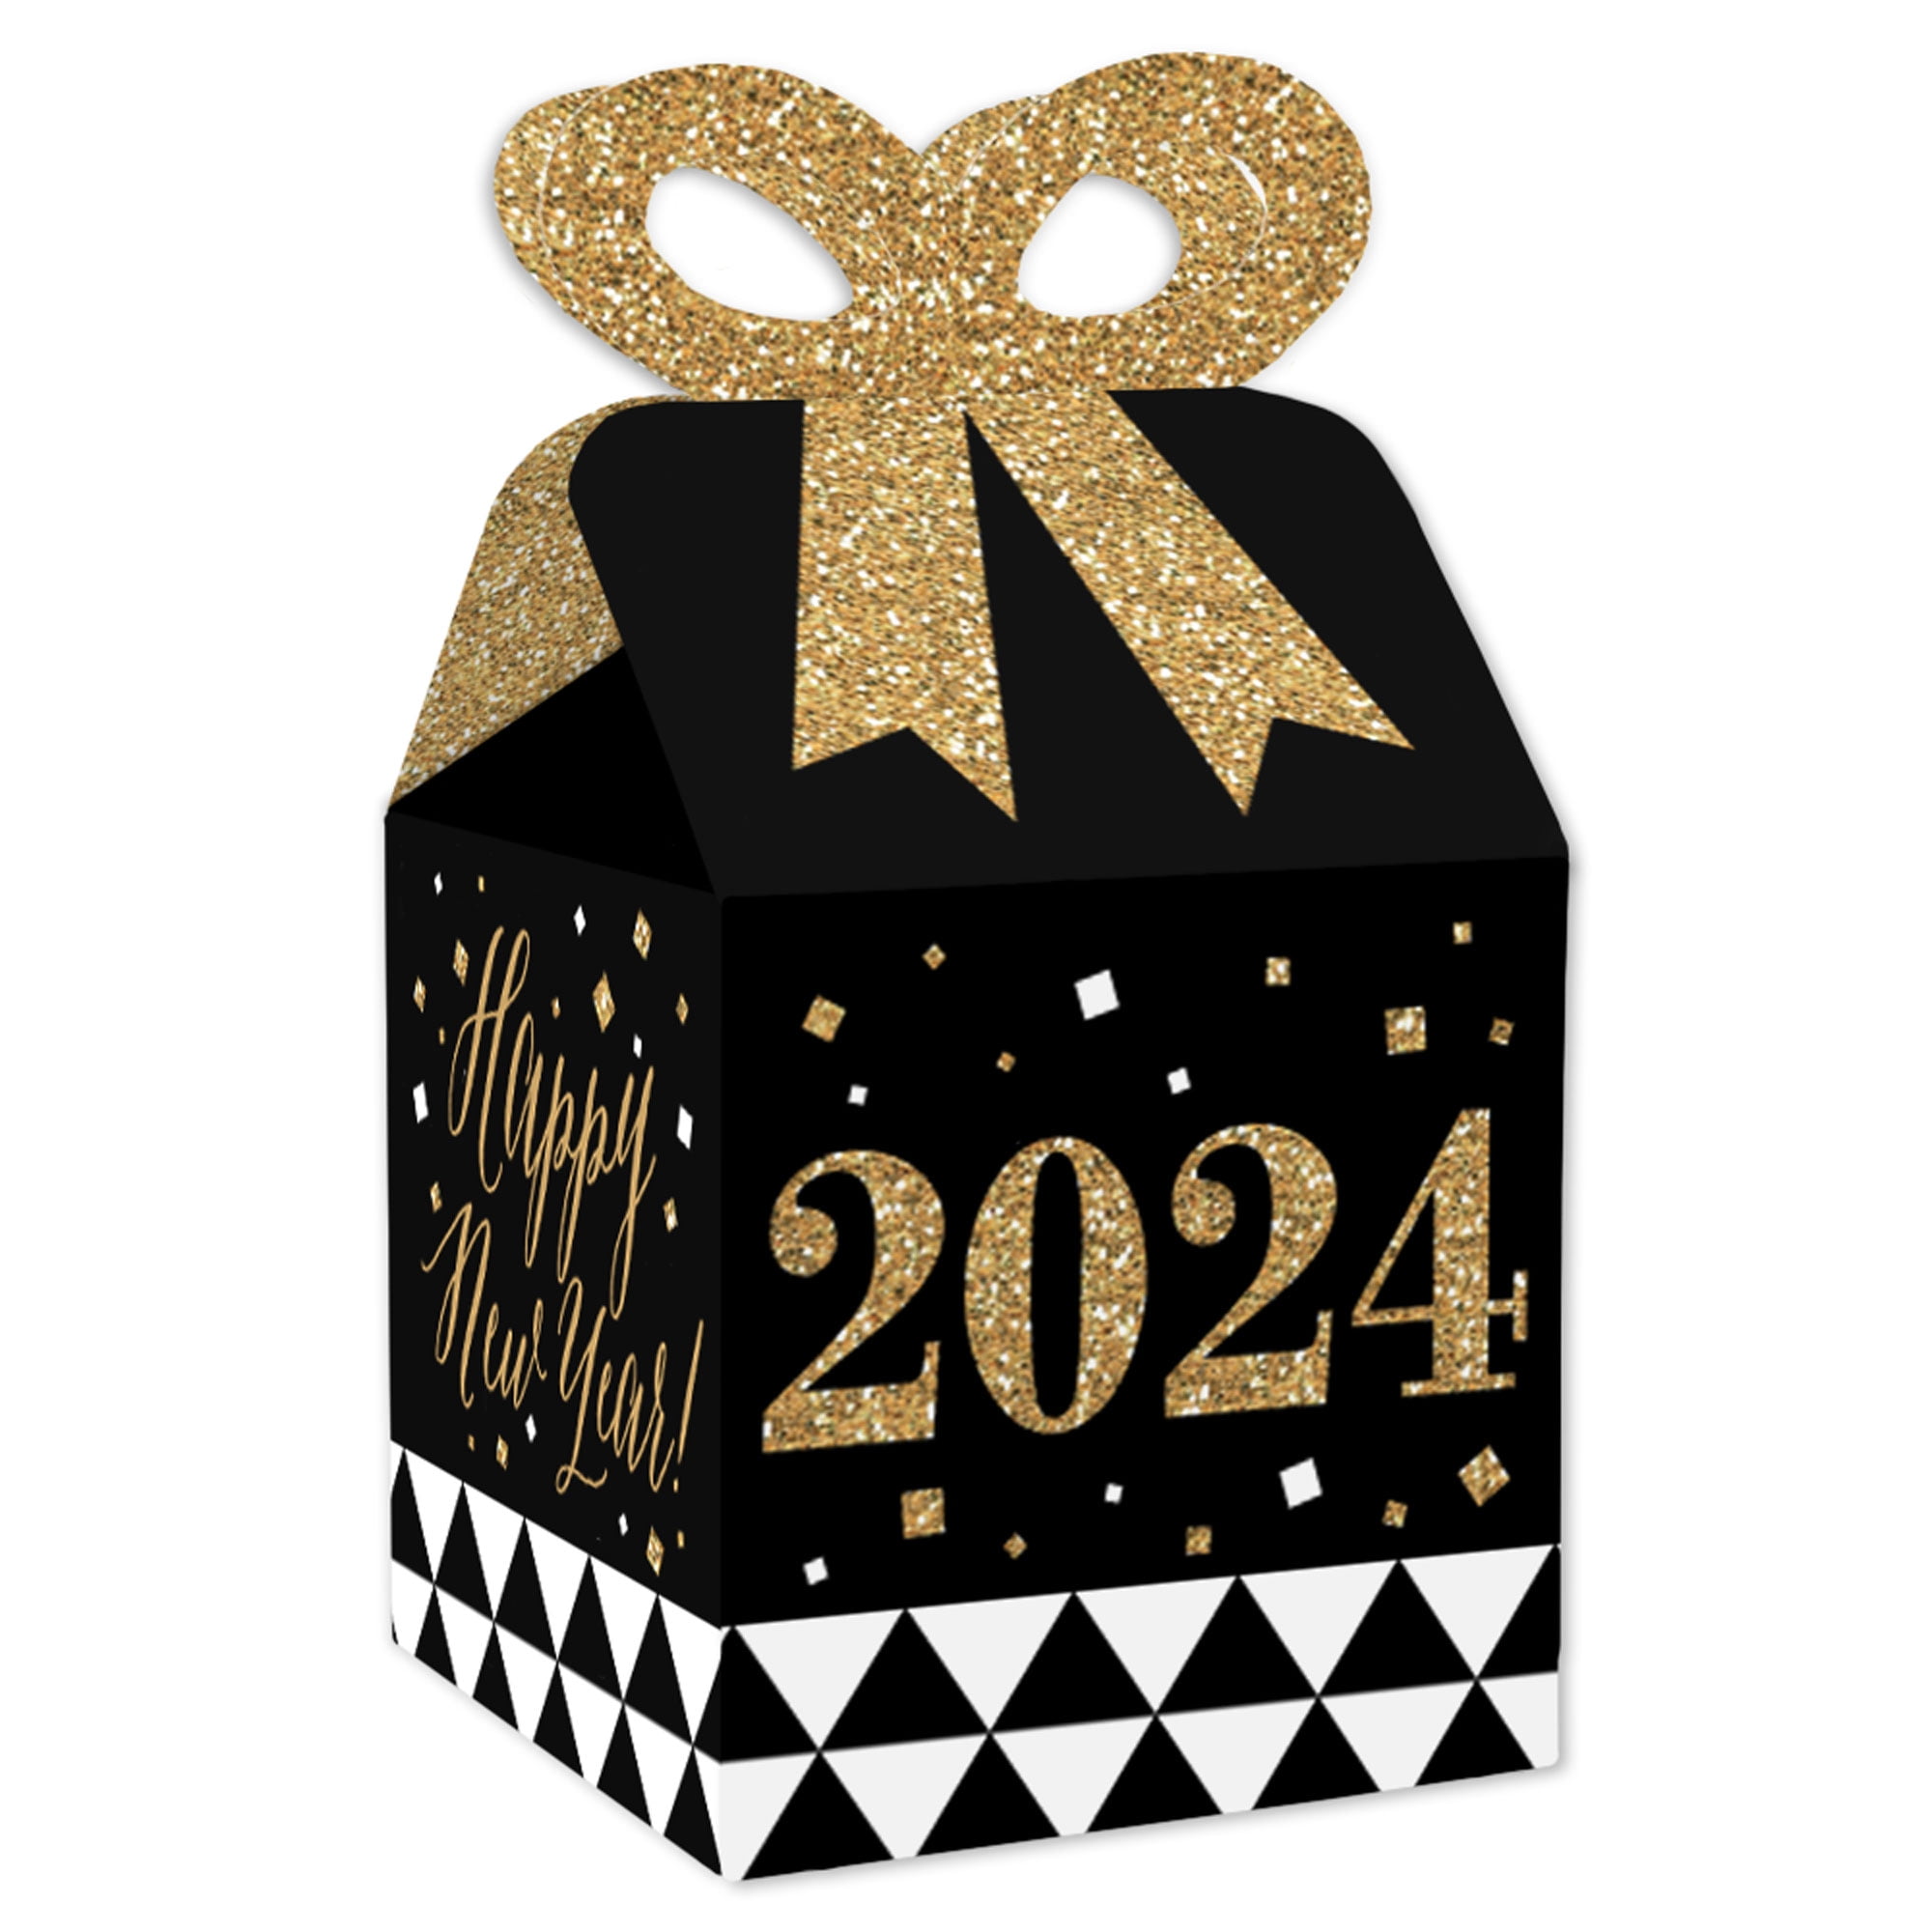 The 50 Best Small Gifts of 2024